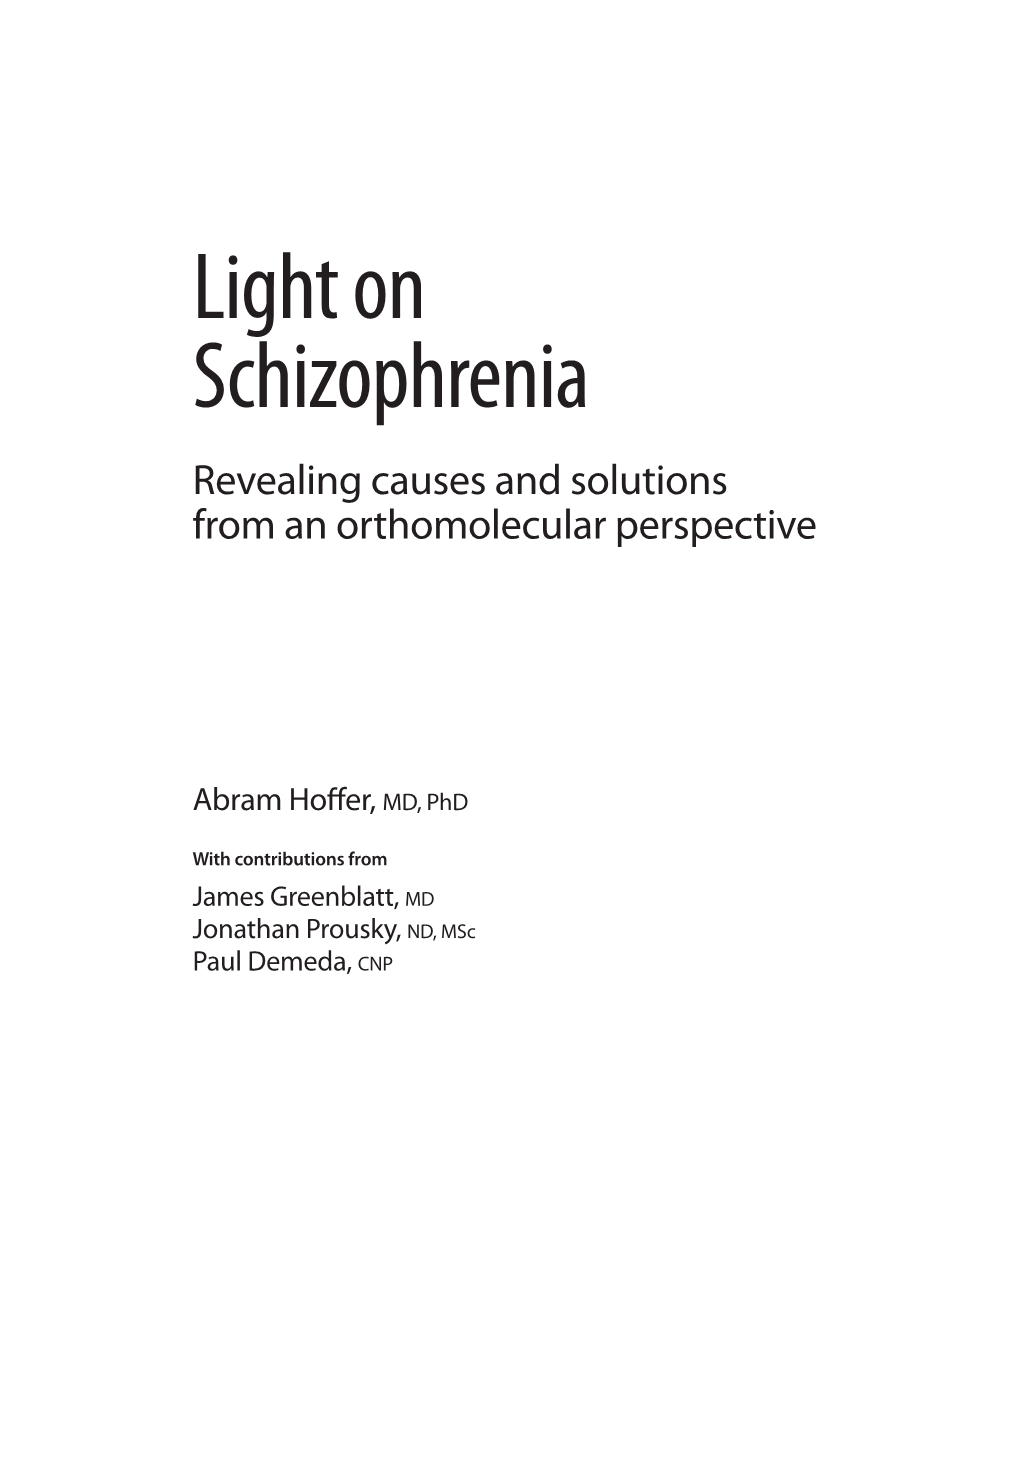 Light on Schizophrenia Revealing Causes and Solutions from an Orthomolecular Perspective